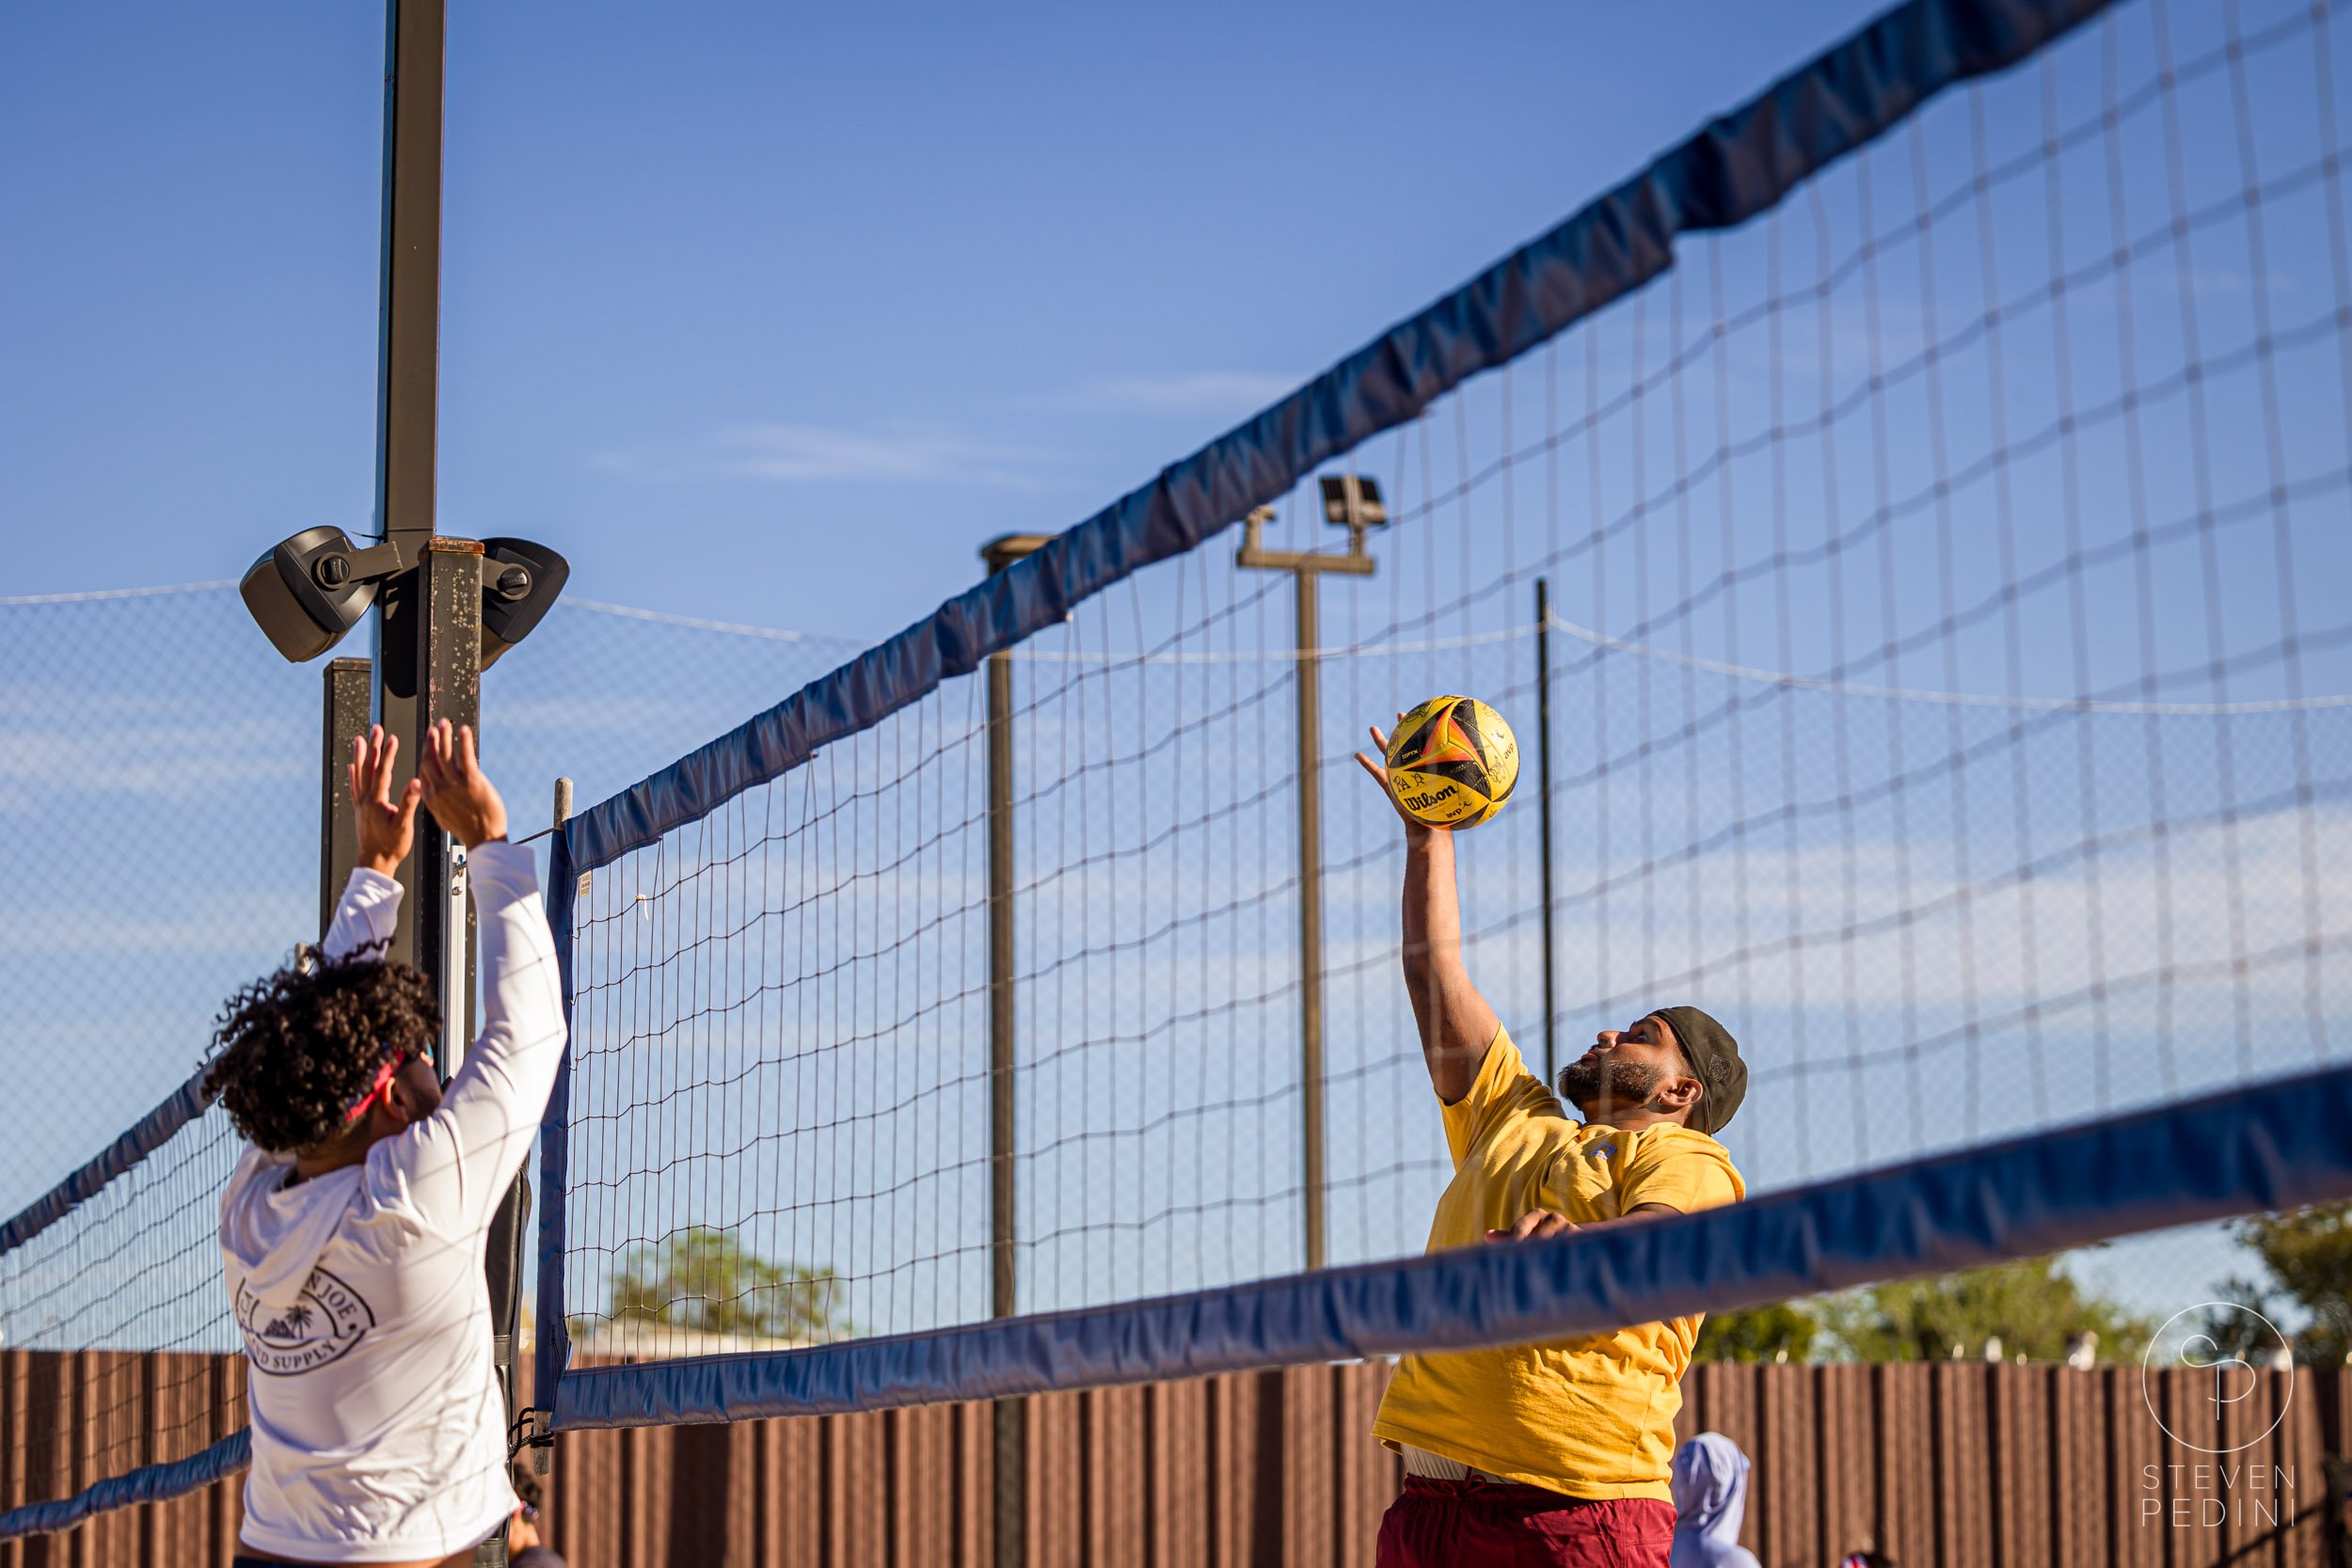 Steven Pedini Photography - Bumpy Pickle - Sand Volleyball - Houston TX - World Cup of Volleyball - 00006.jpg